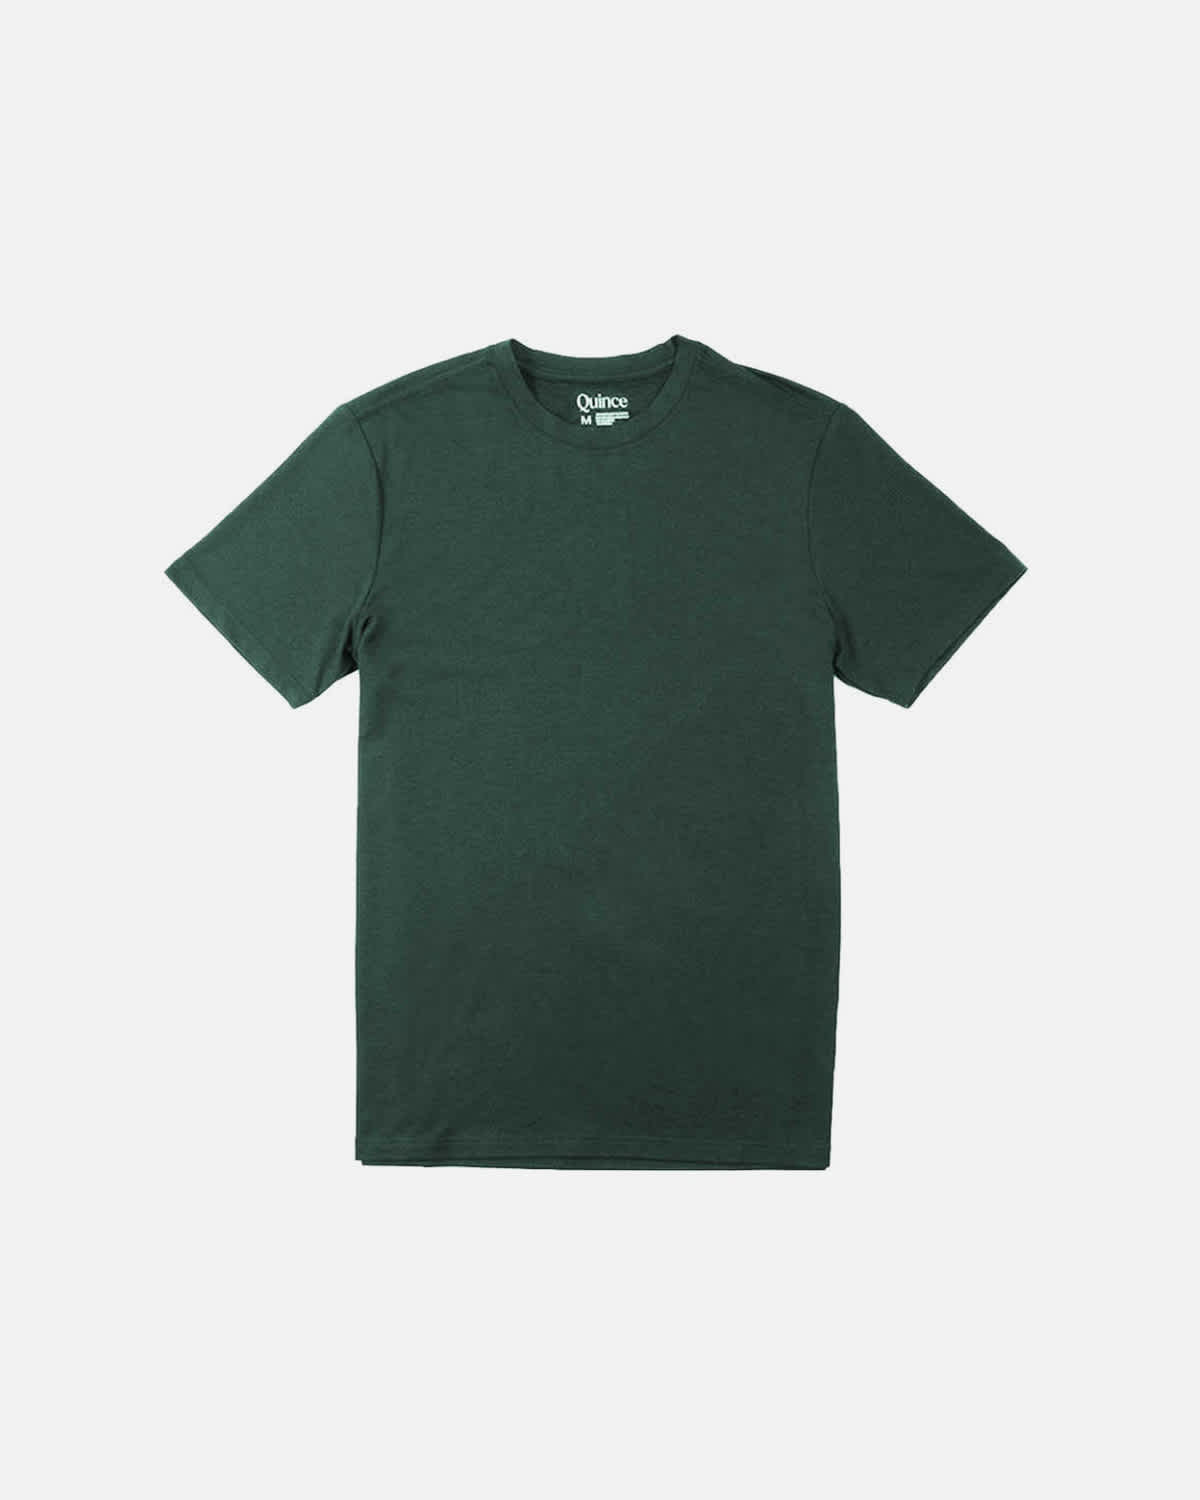 Flowknit Ultra-Soft Performance Tee - Olive